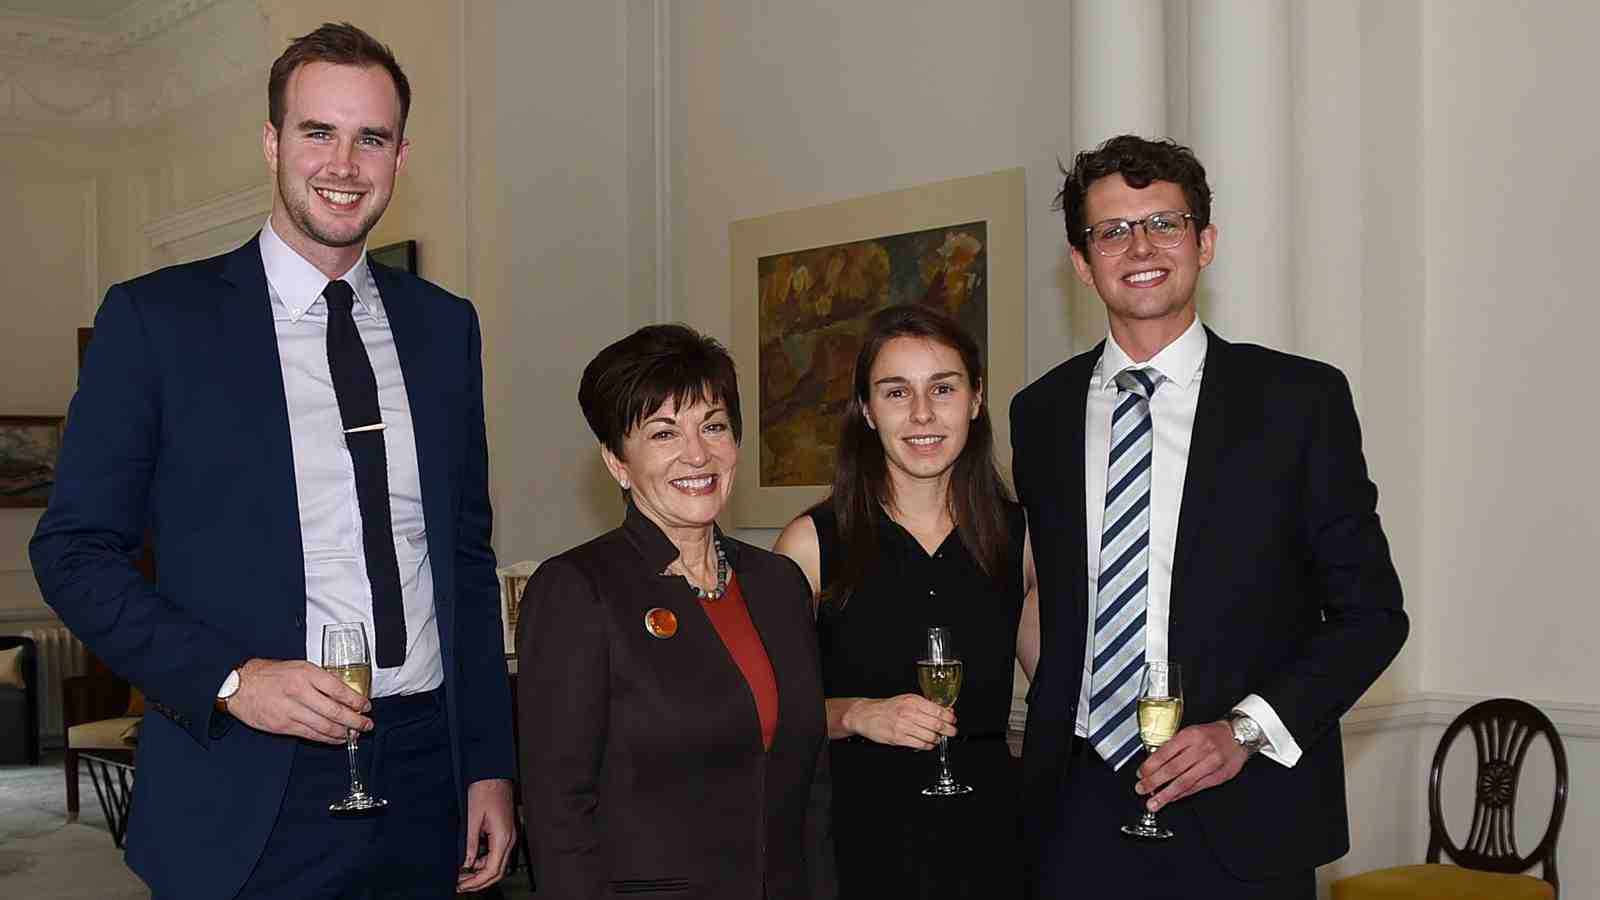 Chris McIntyre with Rt Hon Dame Patsy Reddy, and the other two Rhodes Scholars.